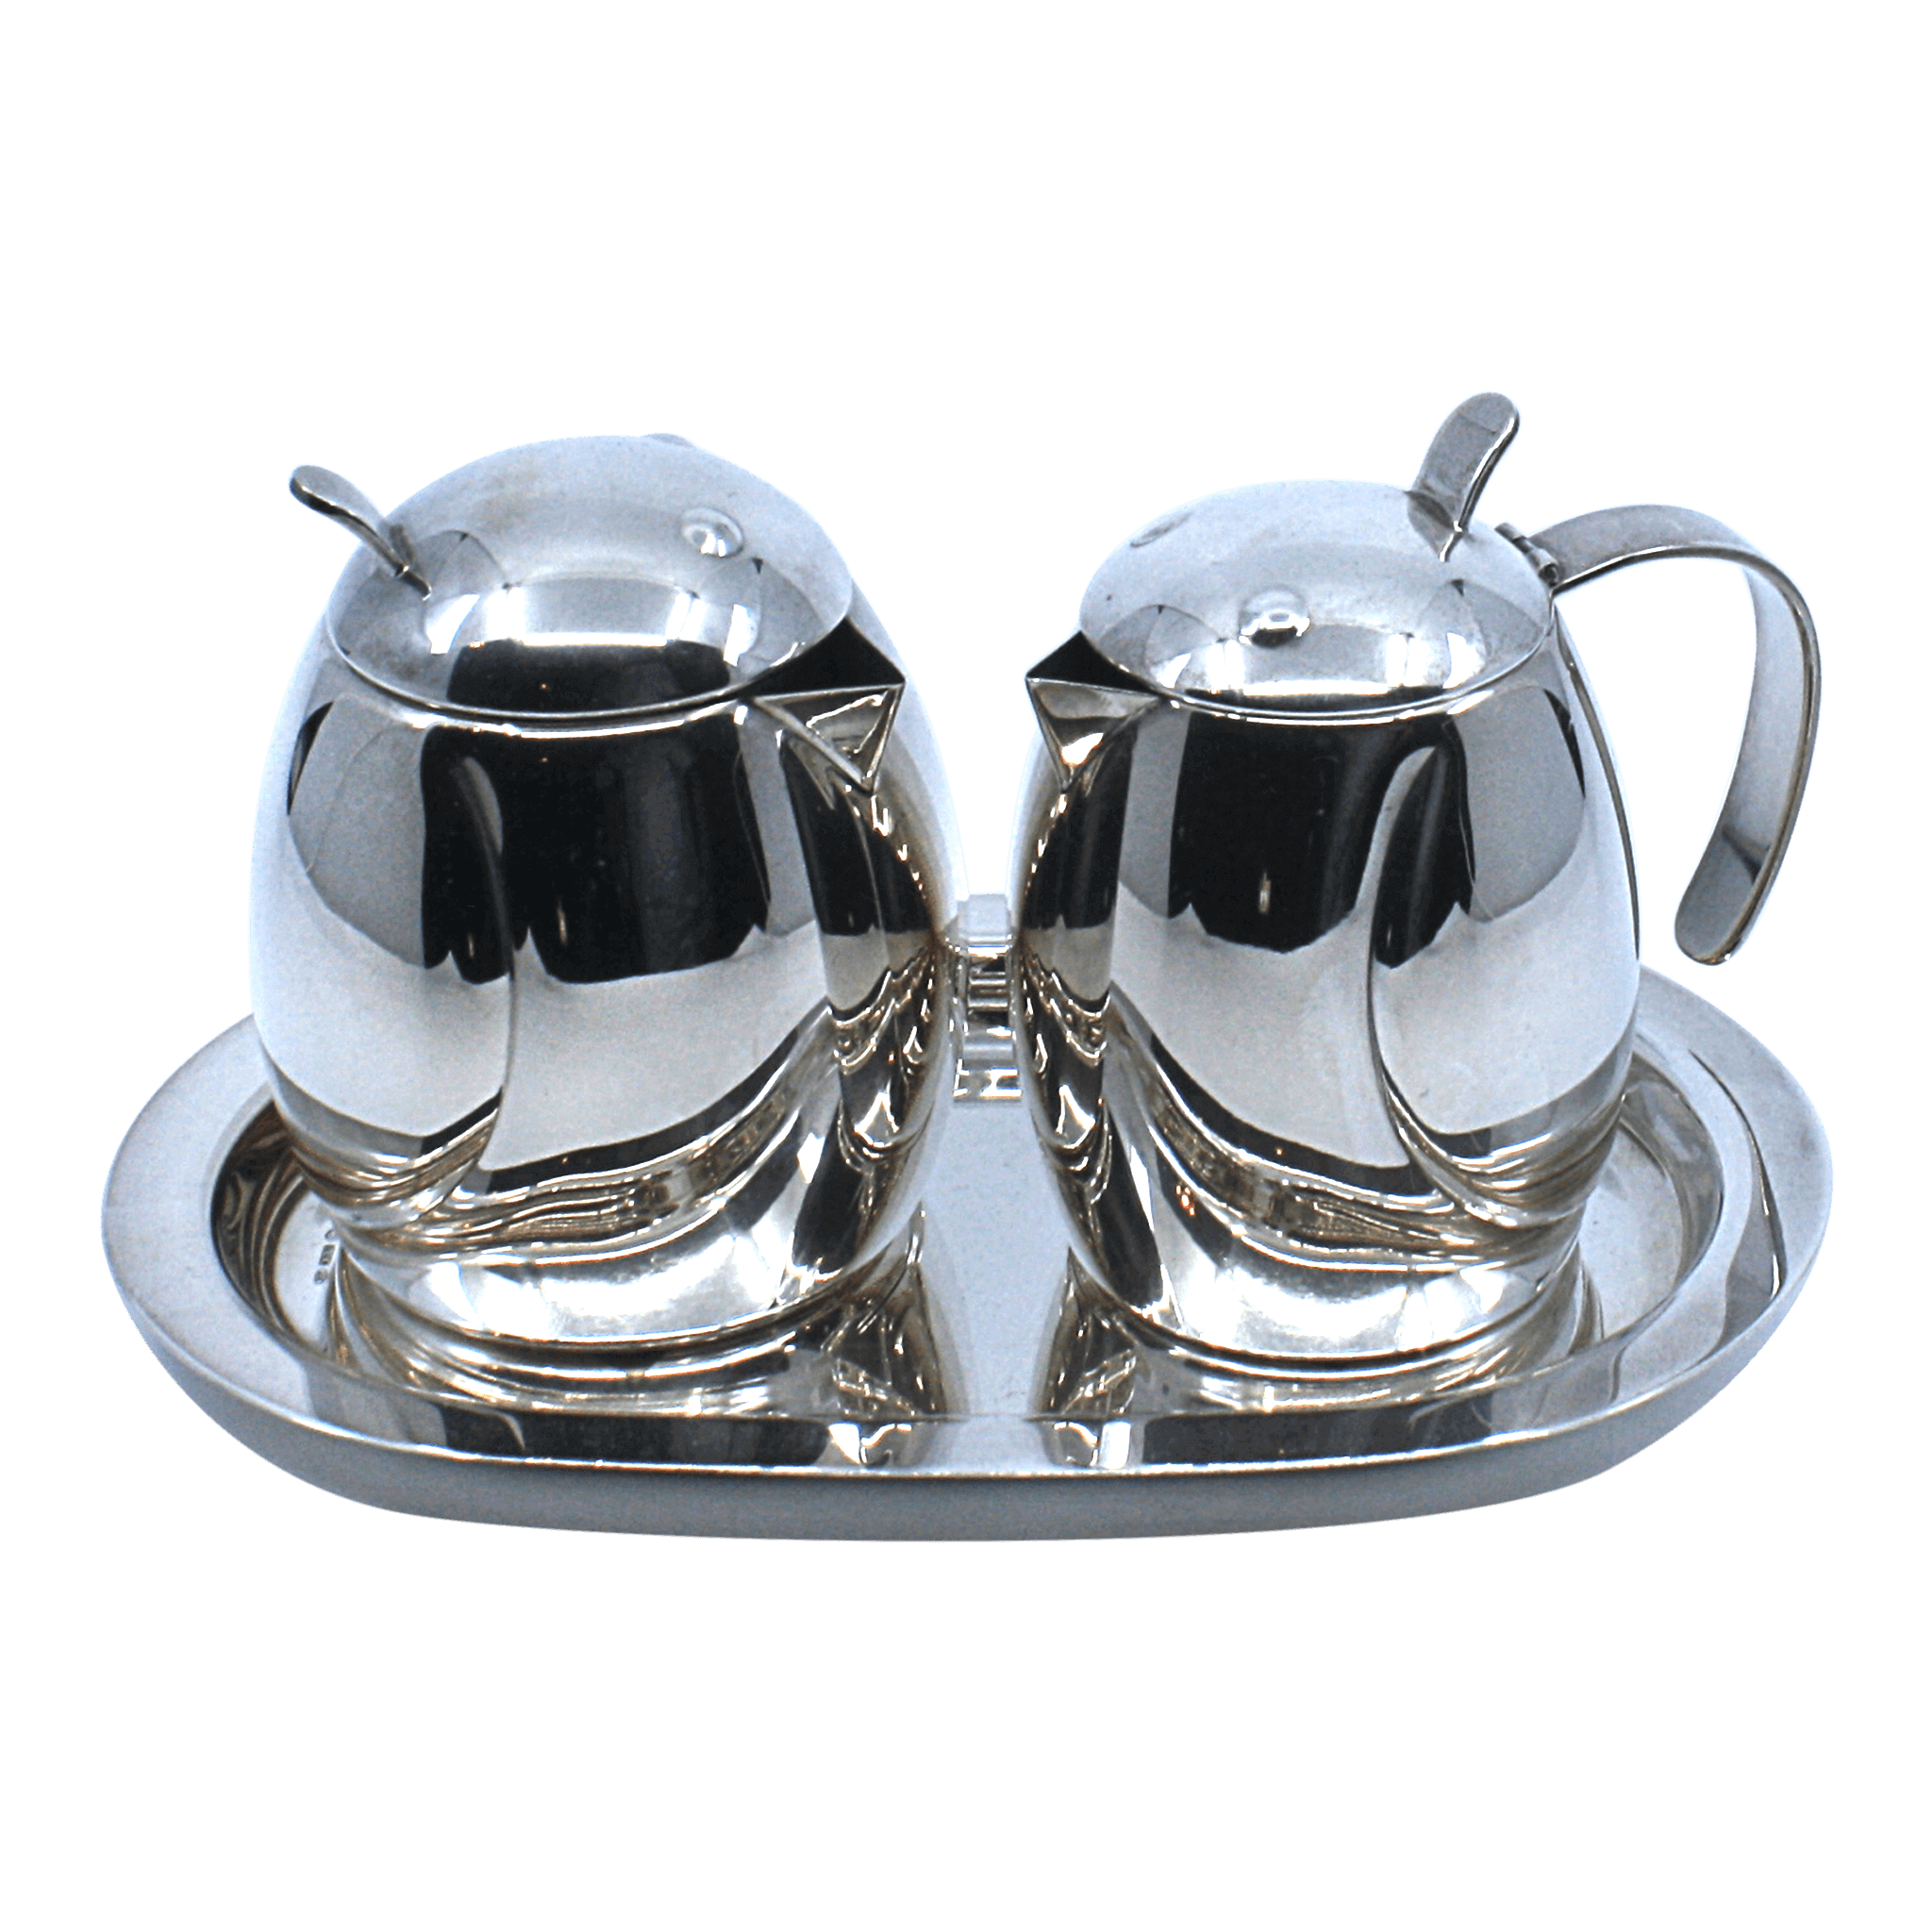 Sterling Silver Mini Coffee Set 6914 at $1260.00 - Piece By Zion Hadad